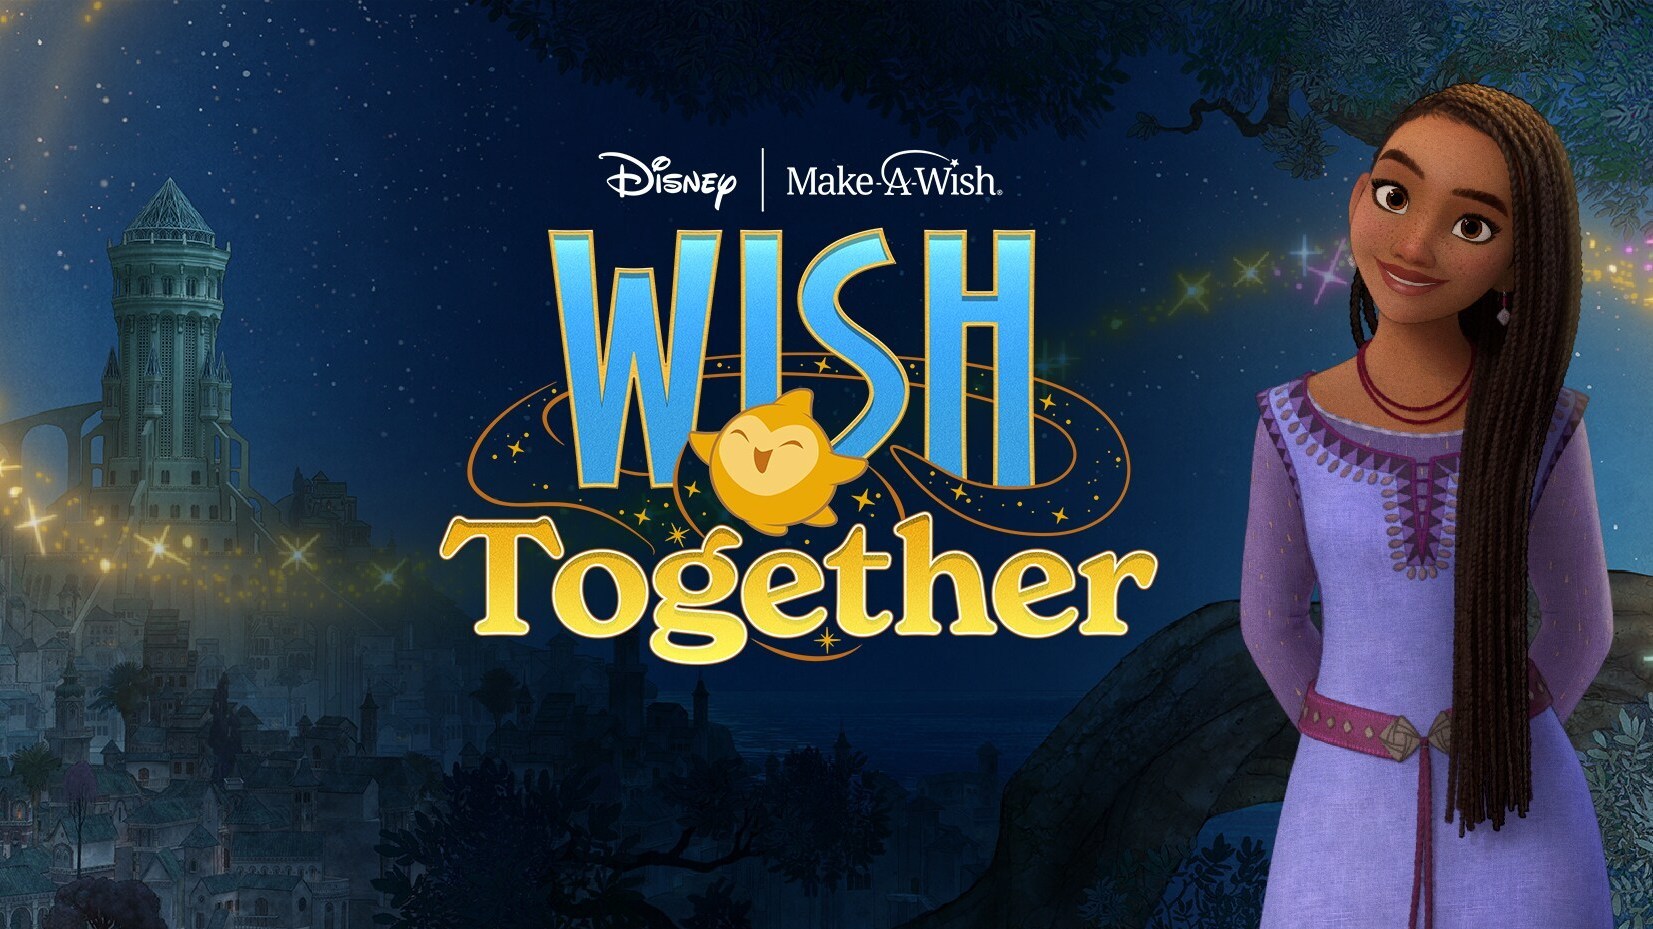 Wish Together screenings at Event and Village Cinemas in support of Make-A-Wish